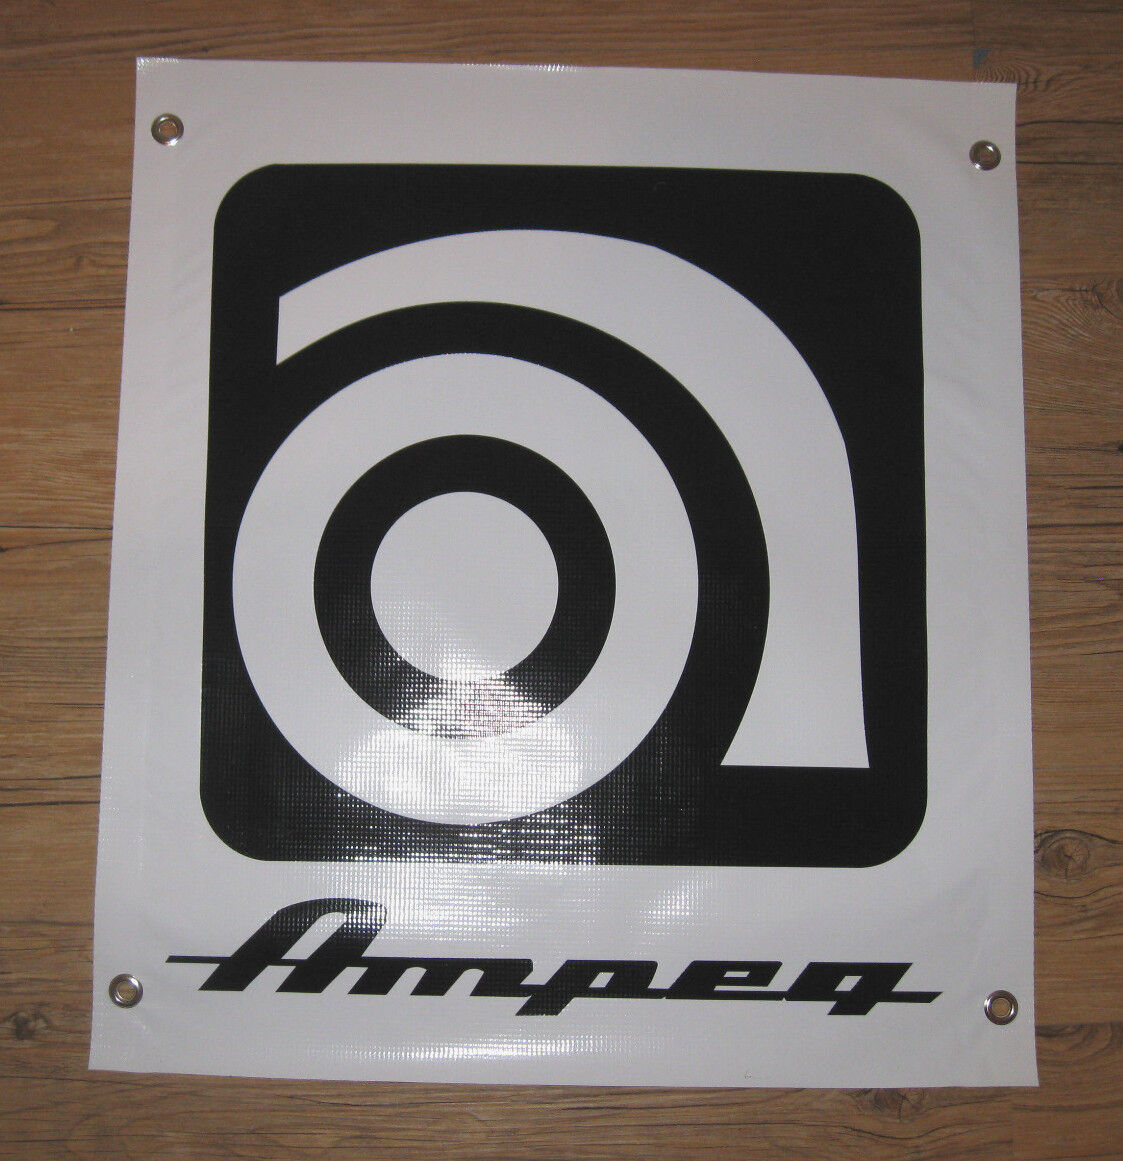 AMPEG AMPLIFIER BANNER - 2\' X 2\' LARGE QUALITY BANNER